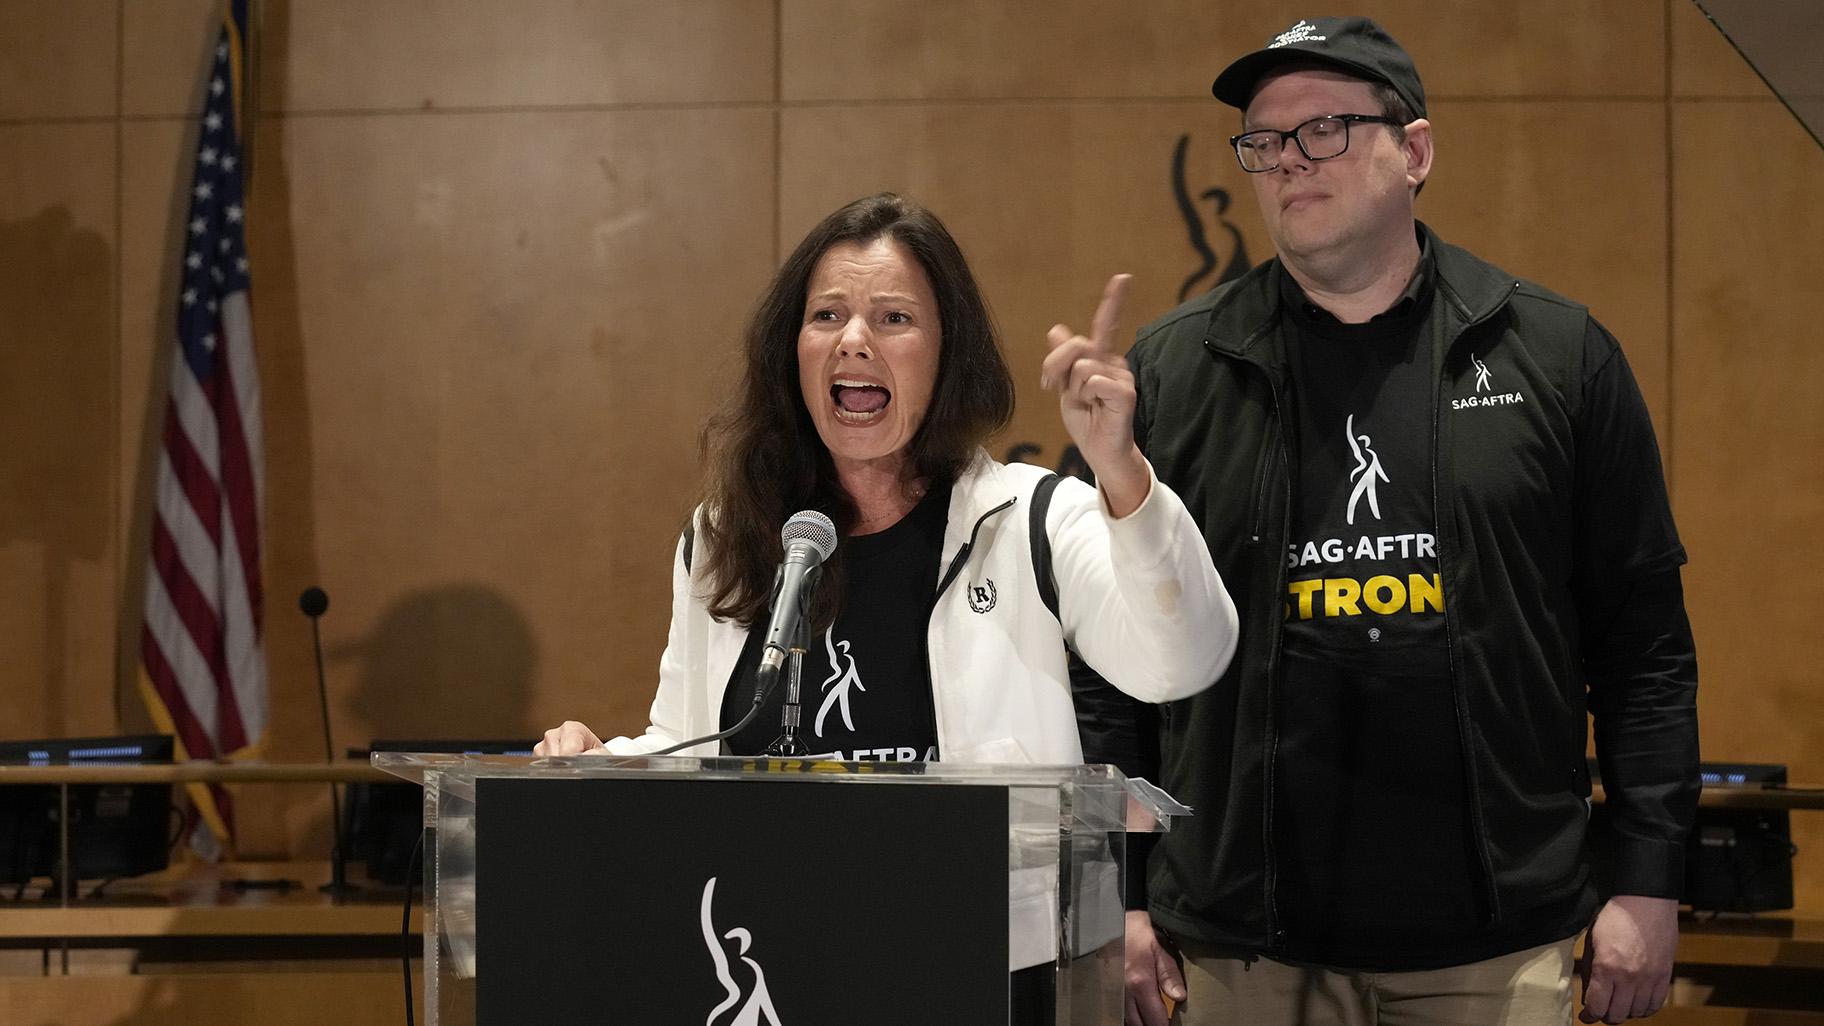  SAG-AFTRA president Fran Drescher, left, and SAG-AFTRA National Executive Director and Chief Negotiator Duncan Crabtree-Ireland speak during a press conference announcing a strike by The Screen Actors Guild-American Federation of Television and Radio Artists on Thursday, July, 13, 2023, in Los Angeles. (AP Photo / Chris Pizzello)